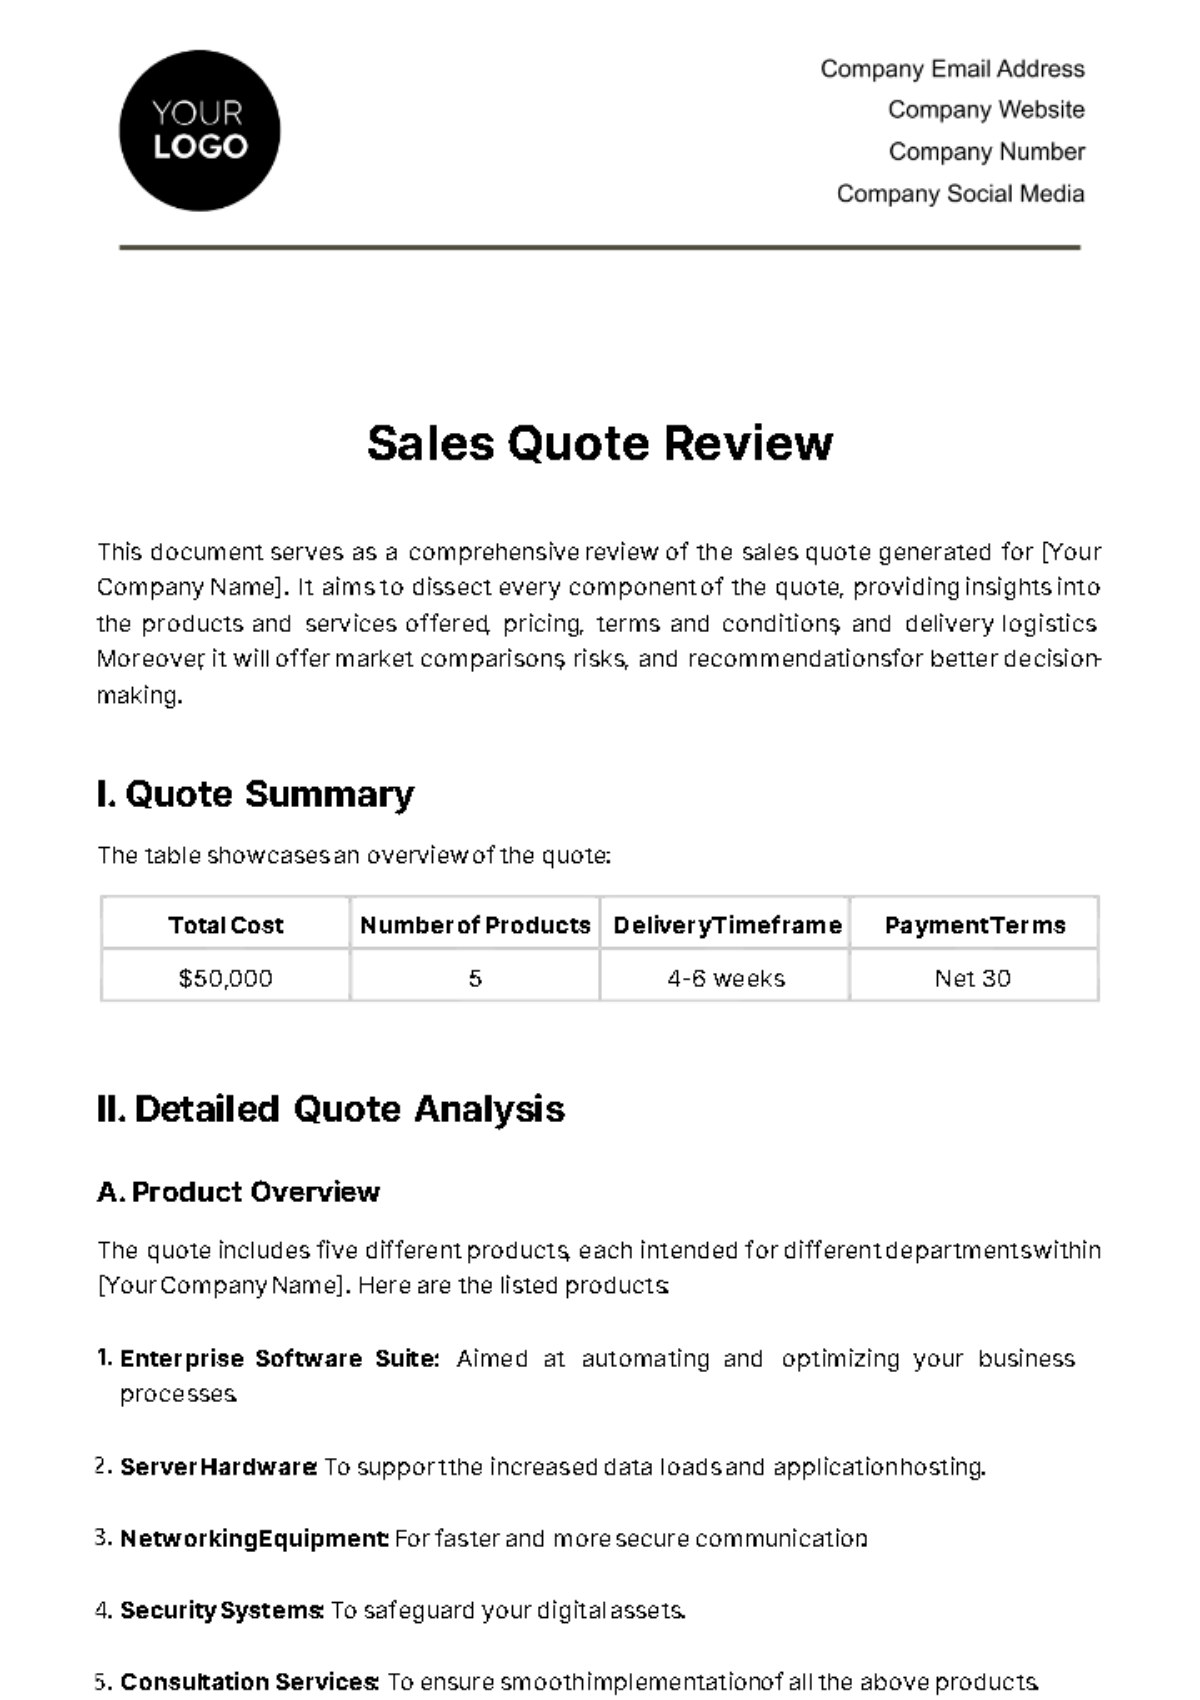 Sales Quote Review Template